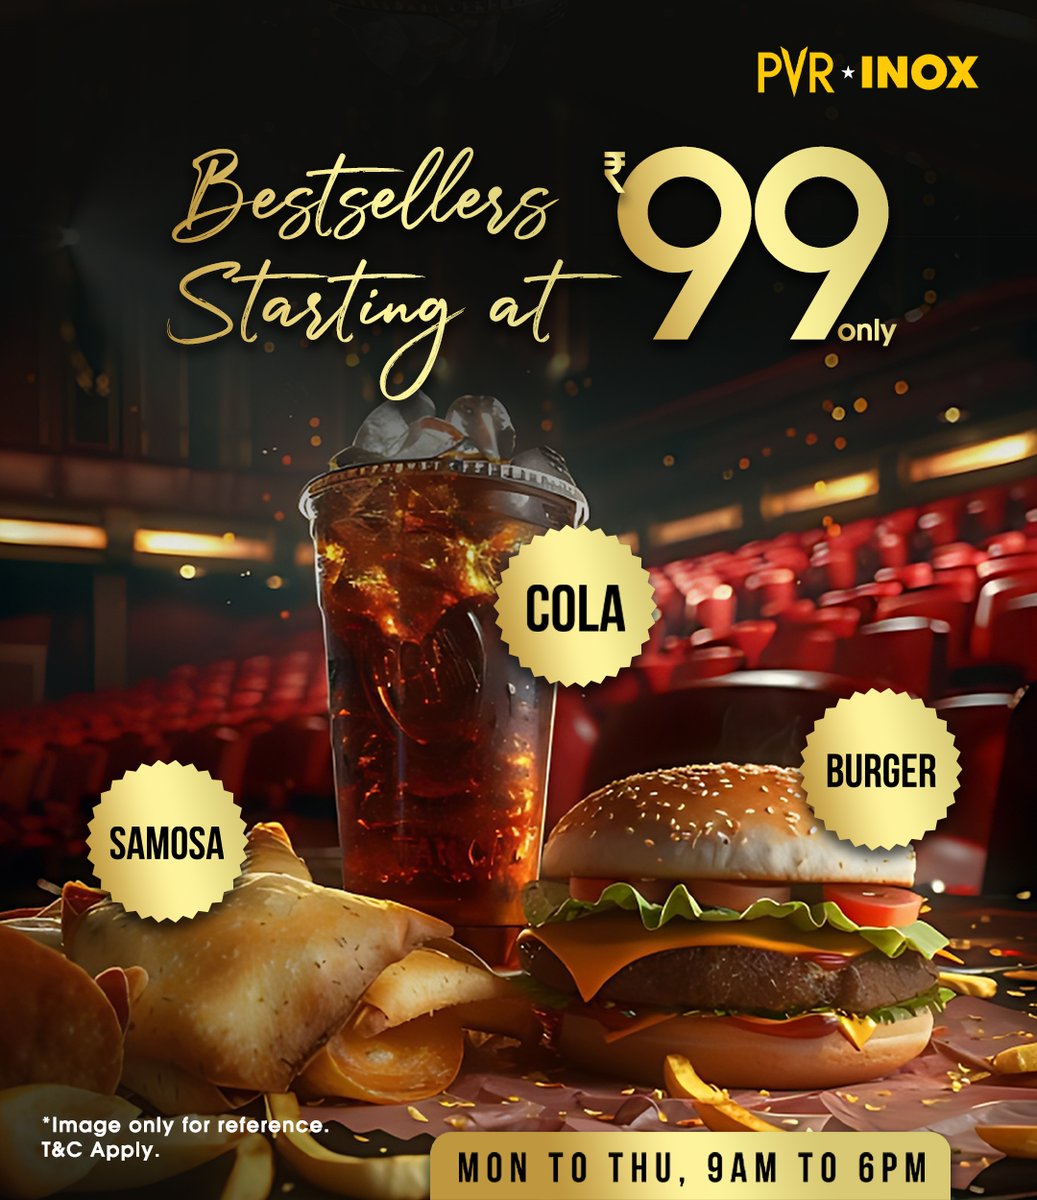 Brace yourself for a flavor explosion! 🍔🥤 Unleash your taste buds with our delectable Cola, Burger, and Samosa combo, starting at an unbeatable Rs99 from Monday-Thursday 9:00 a.m. to 6:00 p.m.
.
.
.
*T&C Apply
#TastyDelights #PVRTreats #Samosa #Burger #Offer #Deals #Discount